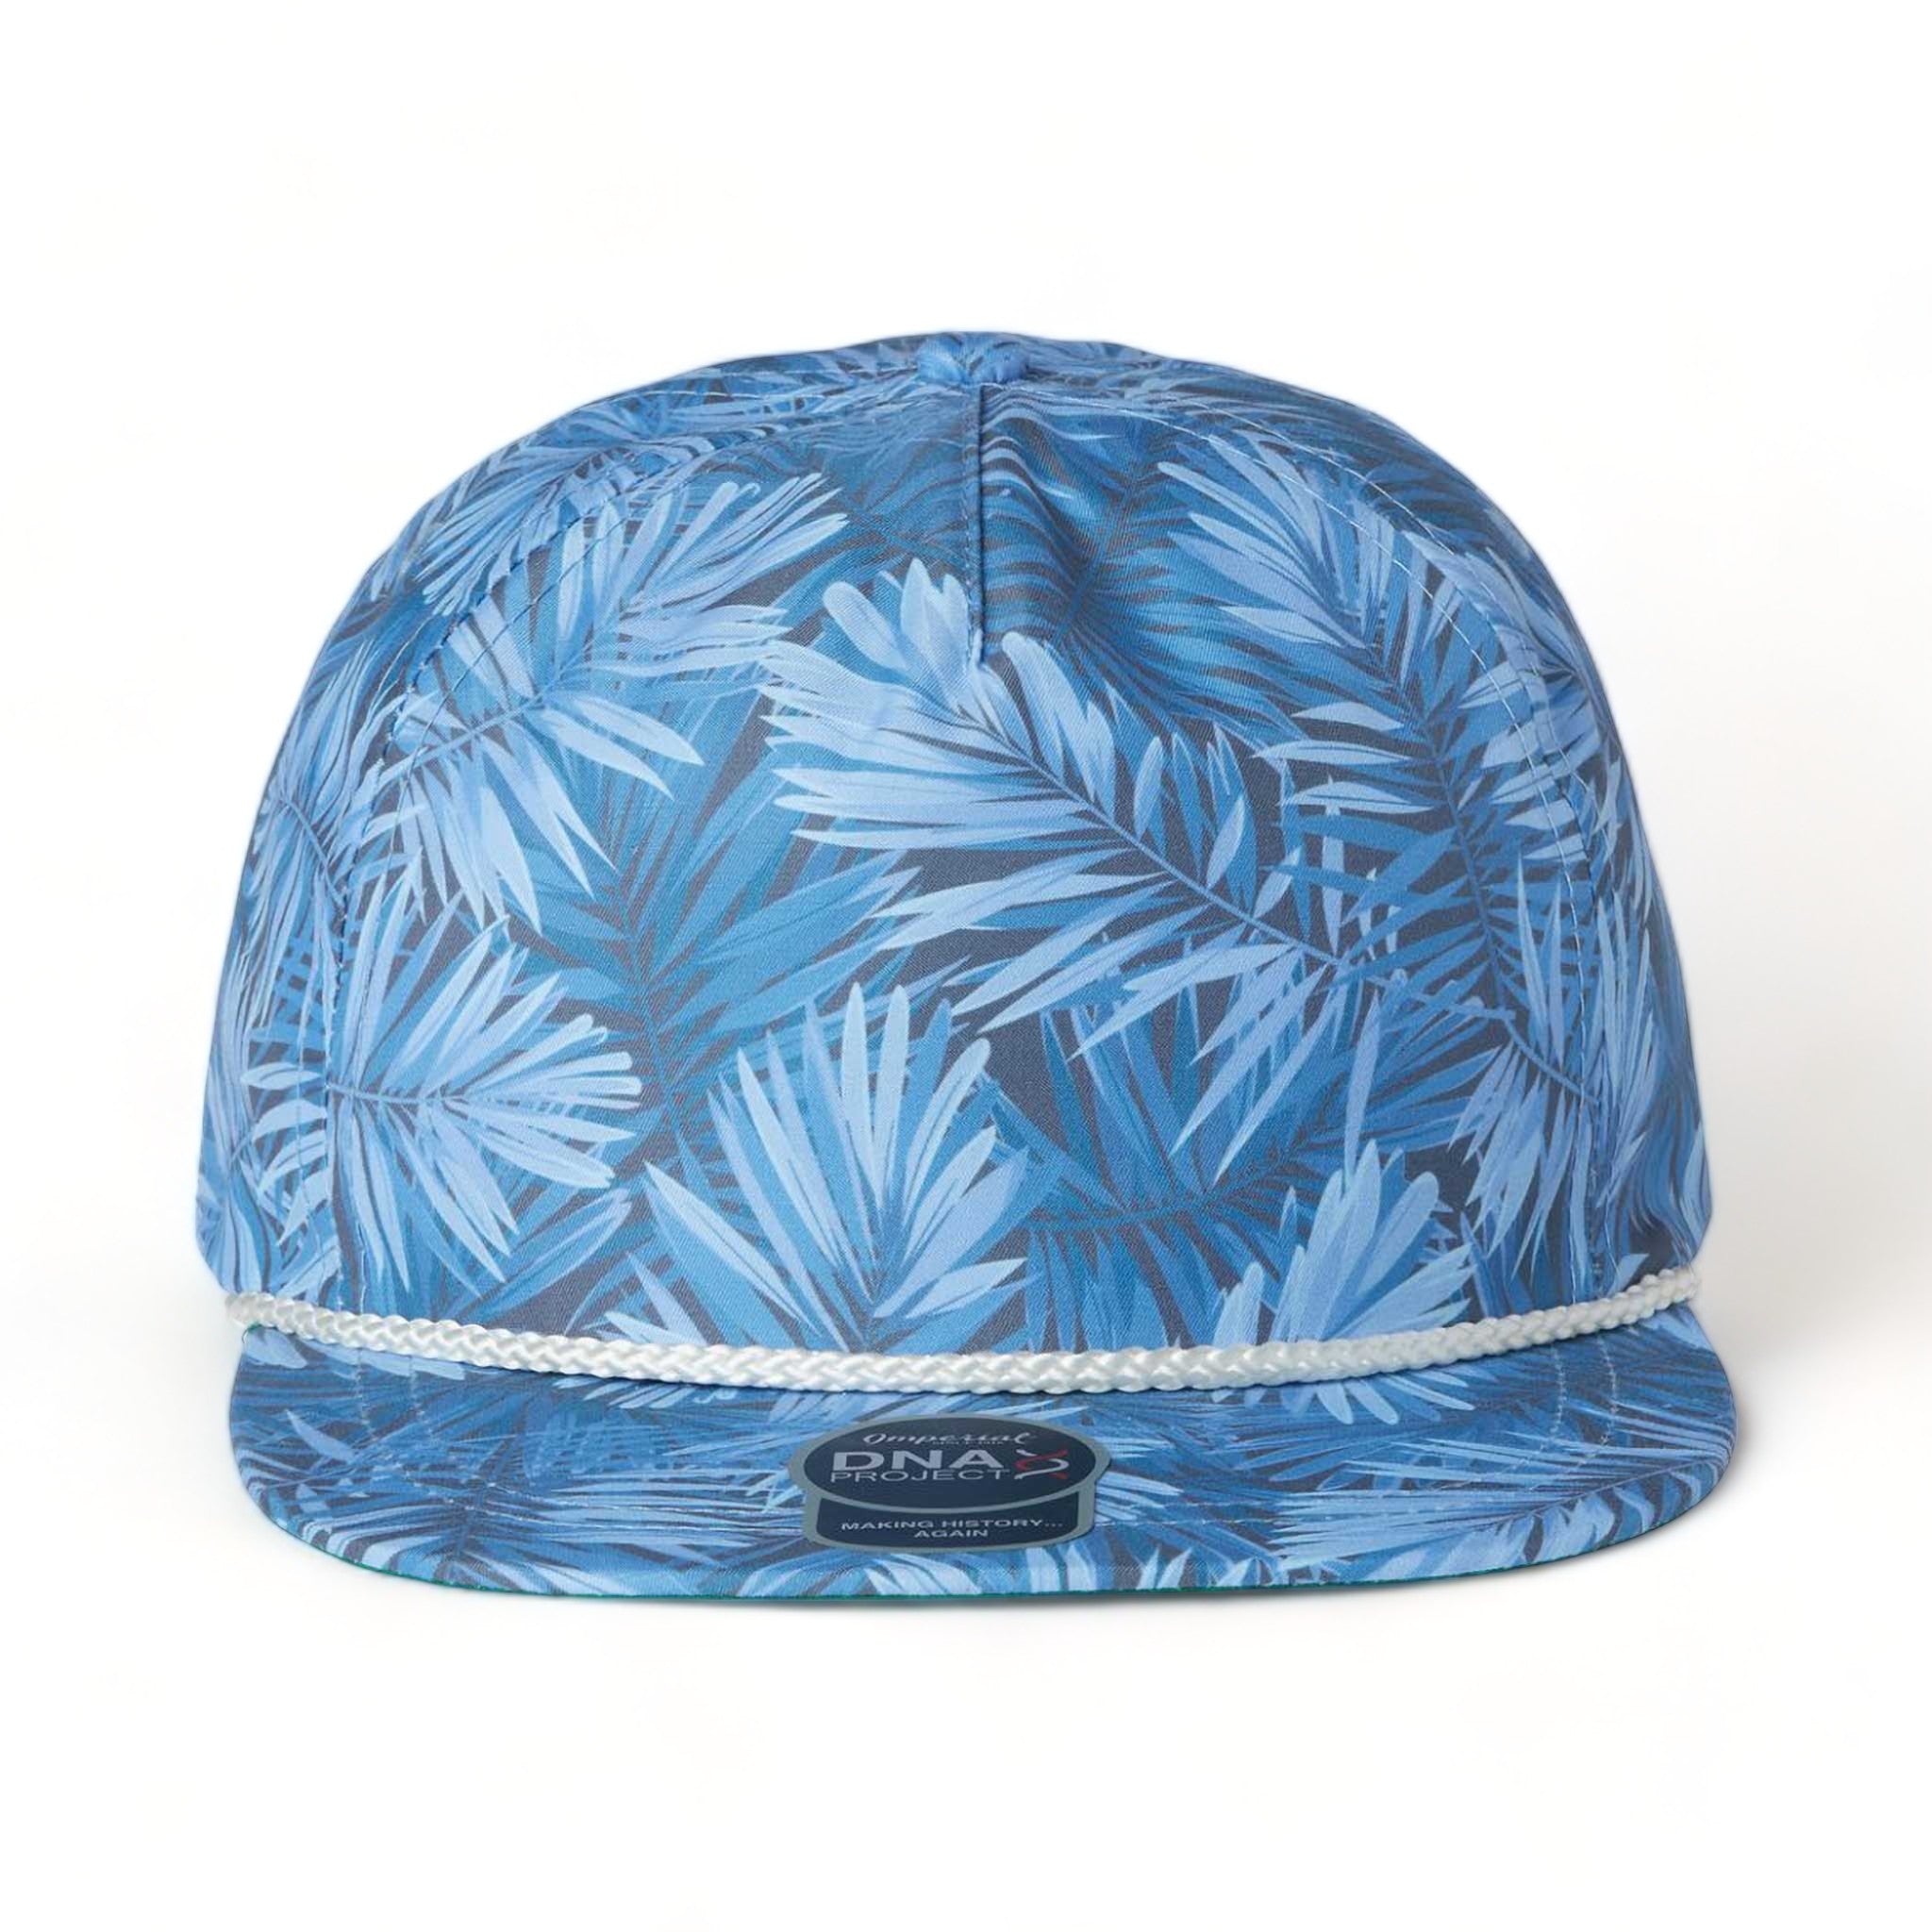 Front view of Imperial DNA010 custom hat in blue hawai'in